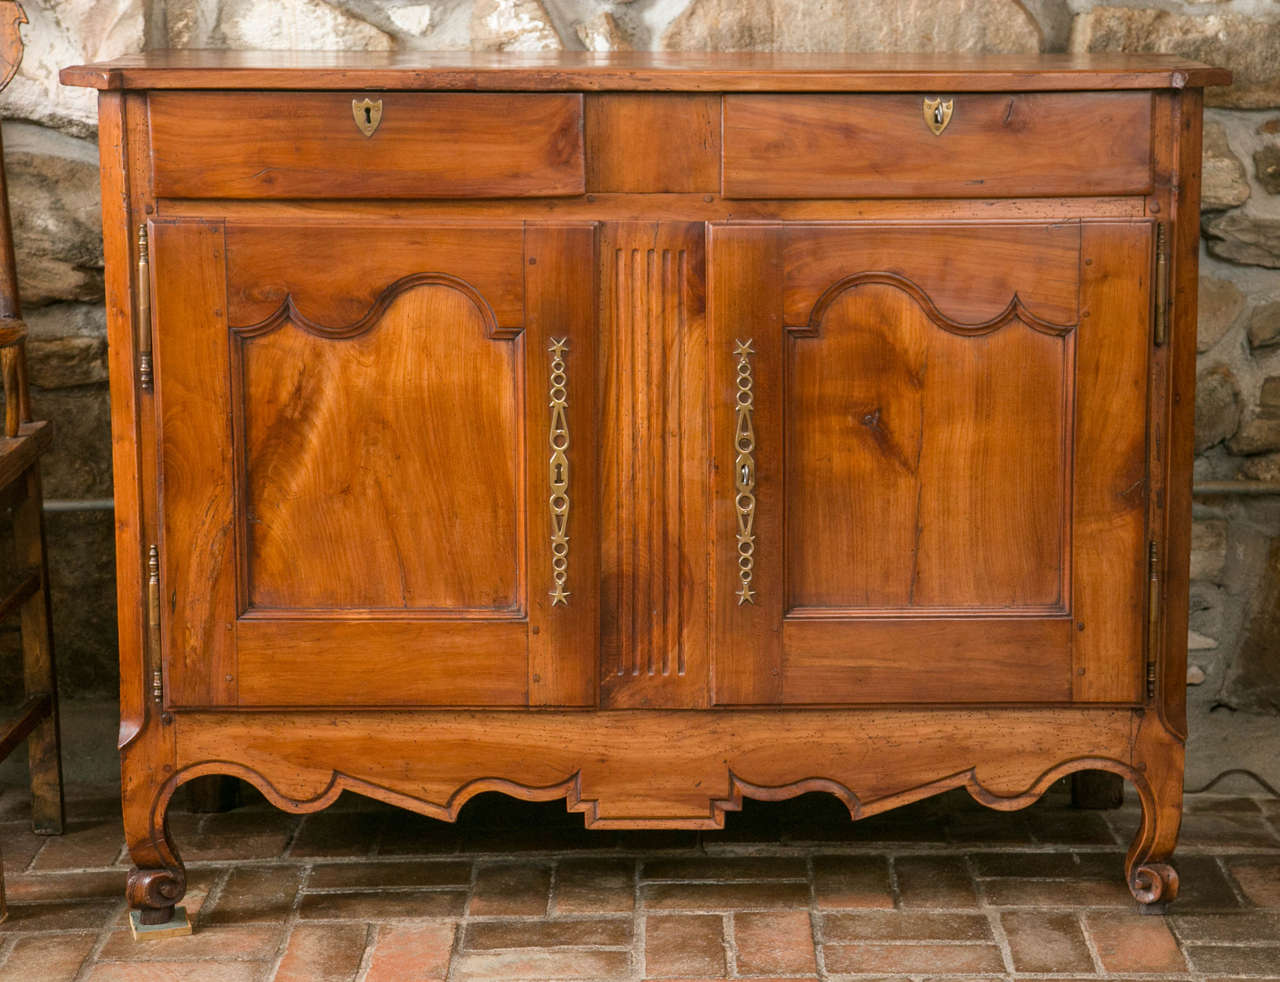 Two drawers over two shaped and recessed panel doors are the traditional arrangement for buffets and this one doesn’t disappoint. Even more delightful is the fact that the scalloped apron and scrolled feet have survived.